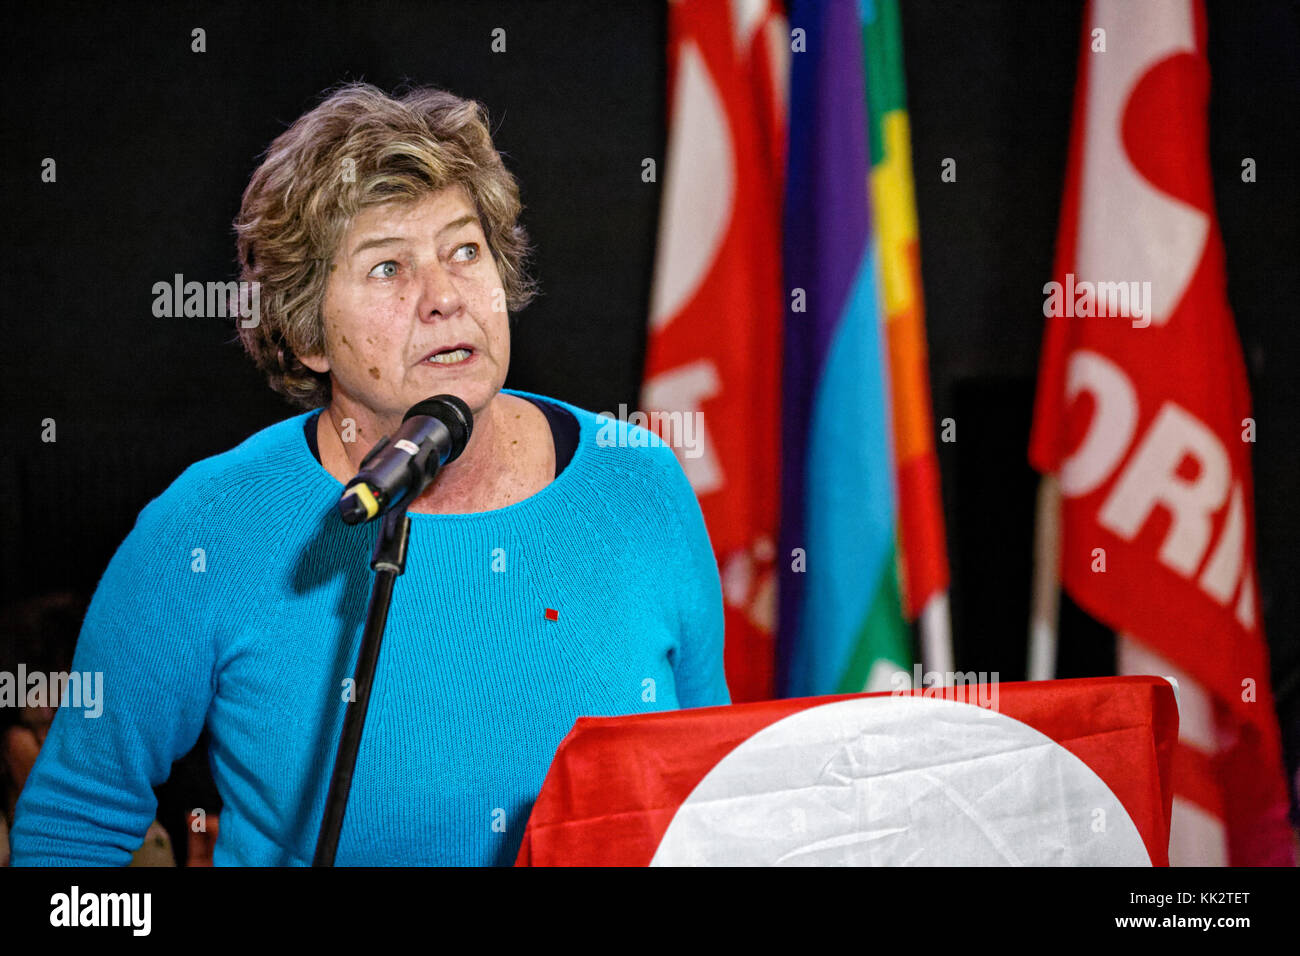 Torino, Italy. 28th November 2017. CGIL General Secretary Susanna Camusso at CGIL union meeting before the strike declared for December. MLBARIONA/Alamy Live News Stock Photo